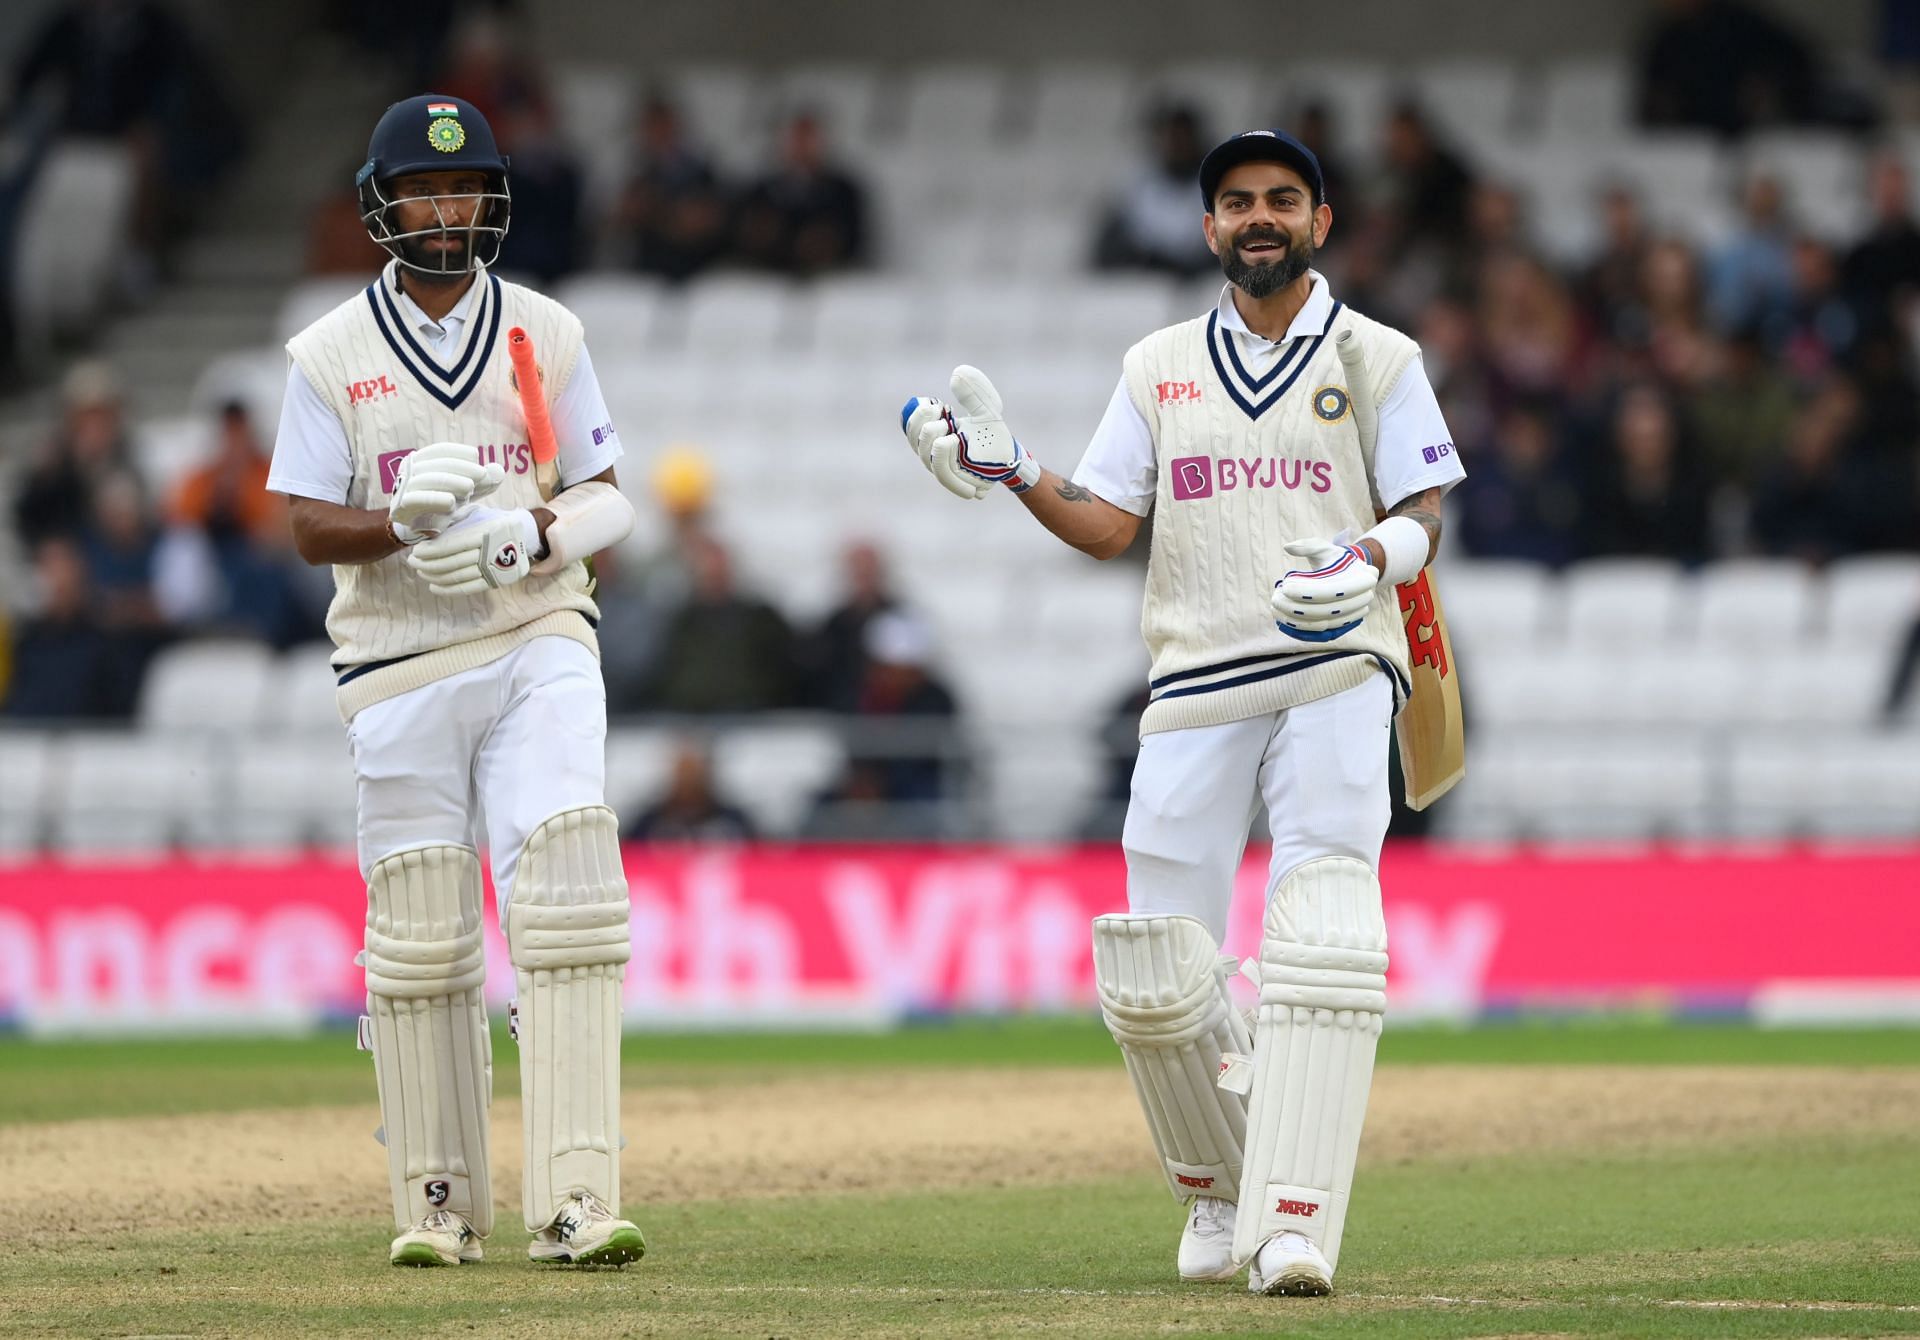 Virat Kohli (R) and Cheteshwar Pujara are the most experienced batters in the Indian lineup.